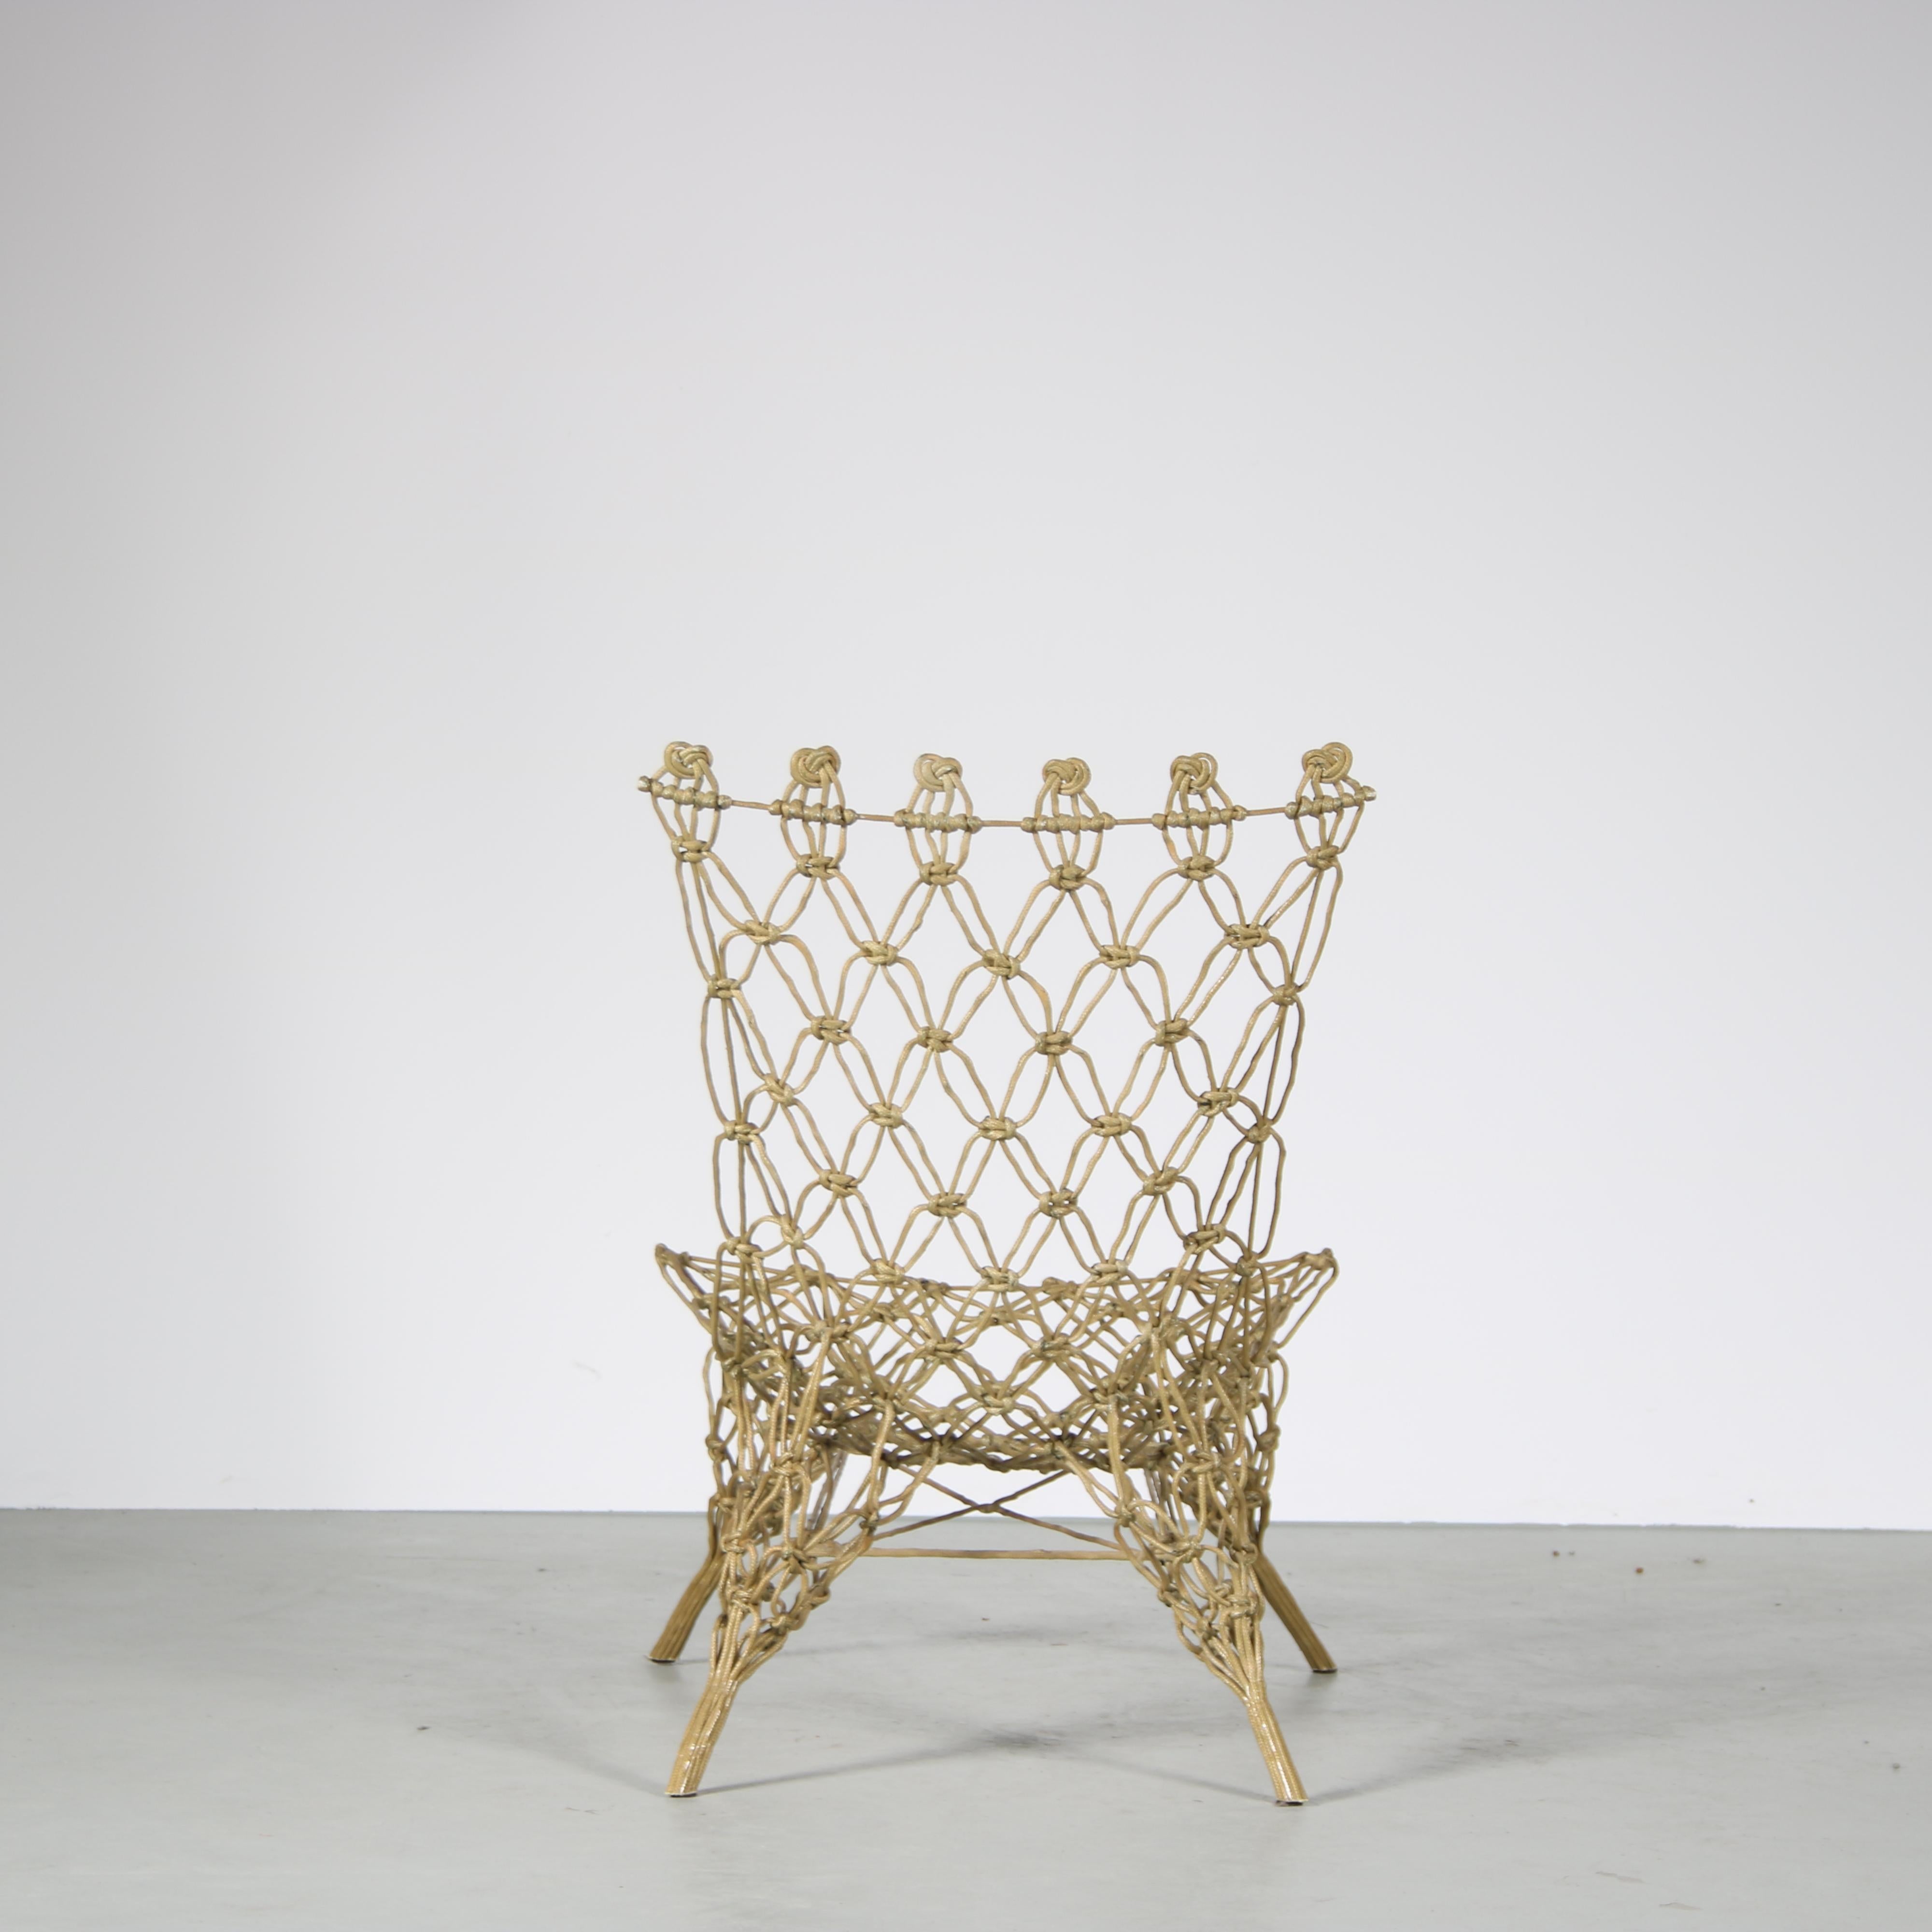 Dutch “Knotted” Chair by Marcel Wanders for Droog Design, Netherlands, 1990